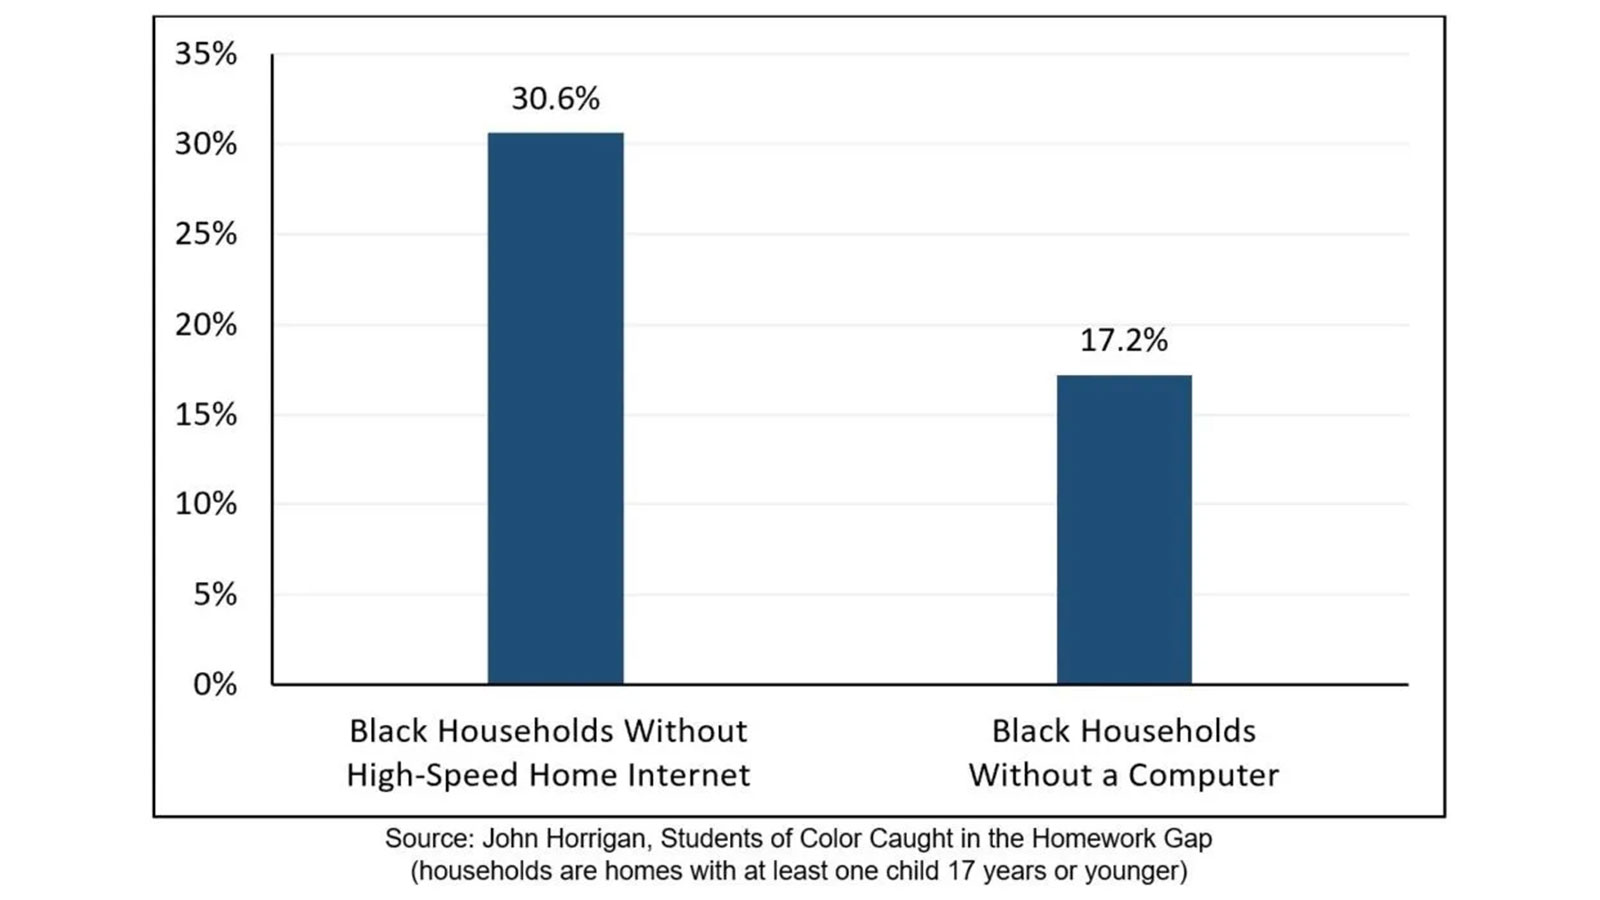 Black households without internet and computers